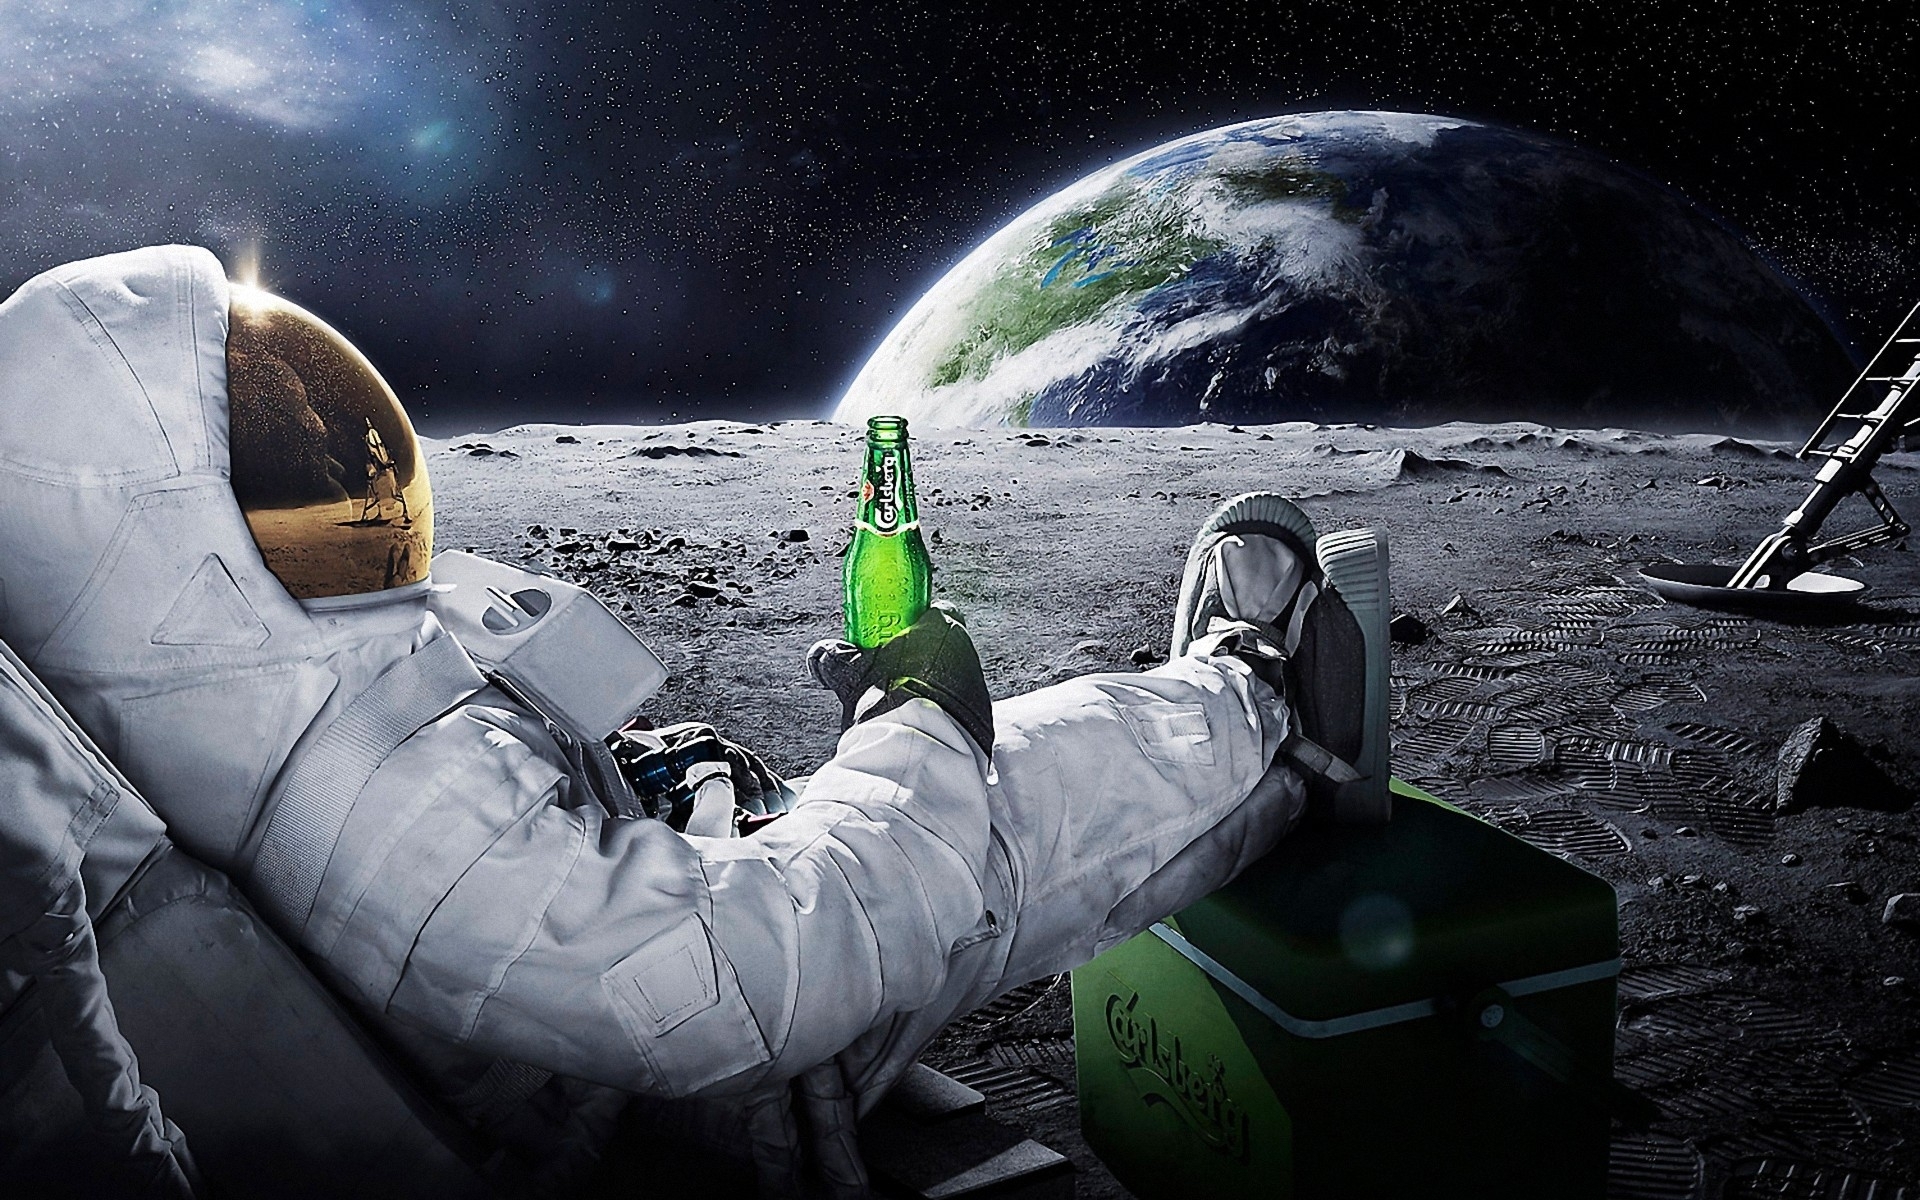 sci fi, Science, Astronaut, Suit, Uniform, Mask, Visor, Boots, Drinks, Beer, Humor, Funny, Planets, Moon, Earth, Stars, Space, Vehicles, Spaceship, Spacecraft, Manipulation, Cg, Digital, Advertising, Products Wallpaper